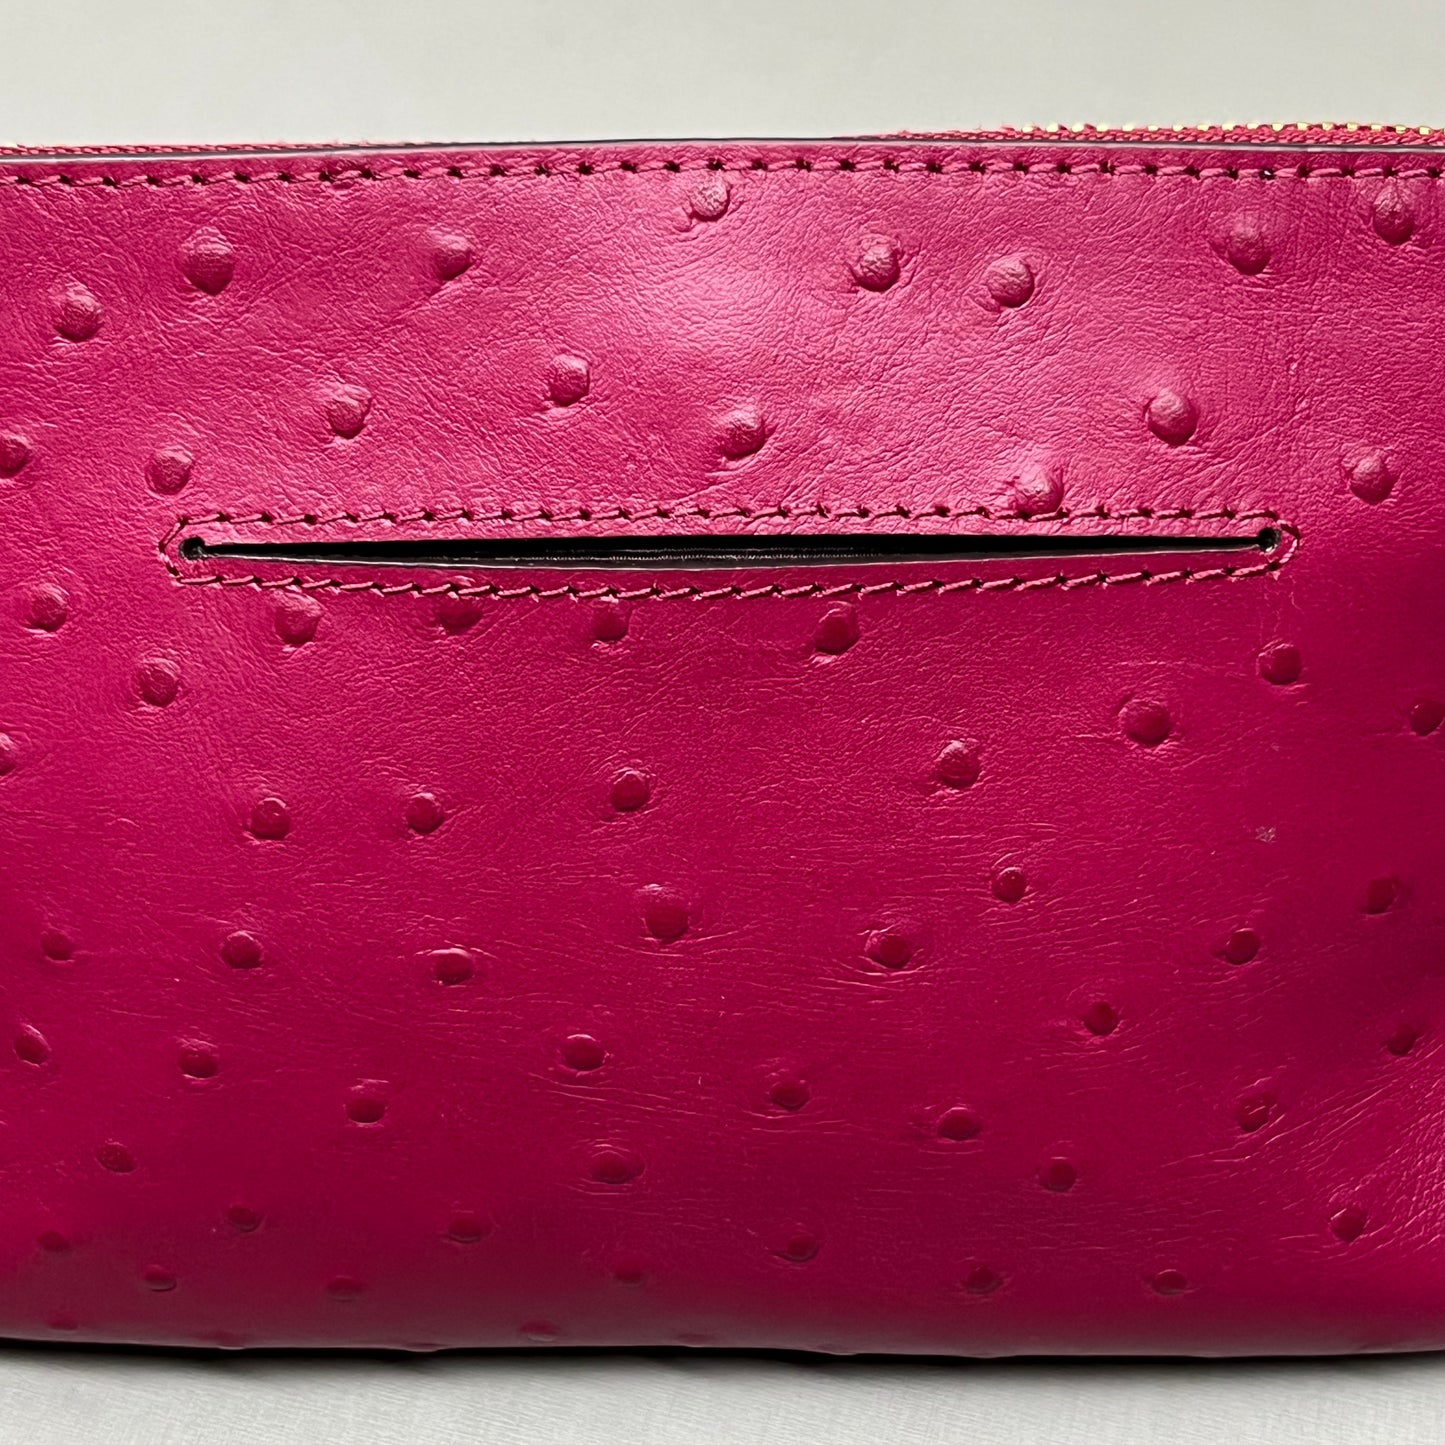 COACH Ostrich Large Leather Wristlet Wallet Phone Case With Chain Pink F79891 (New)